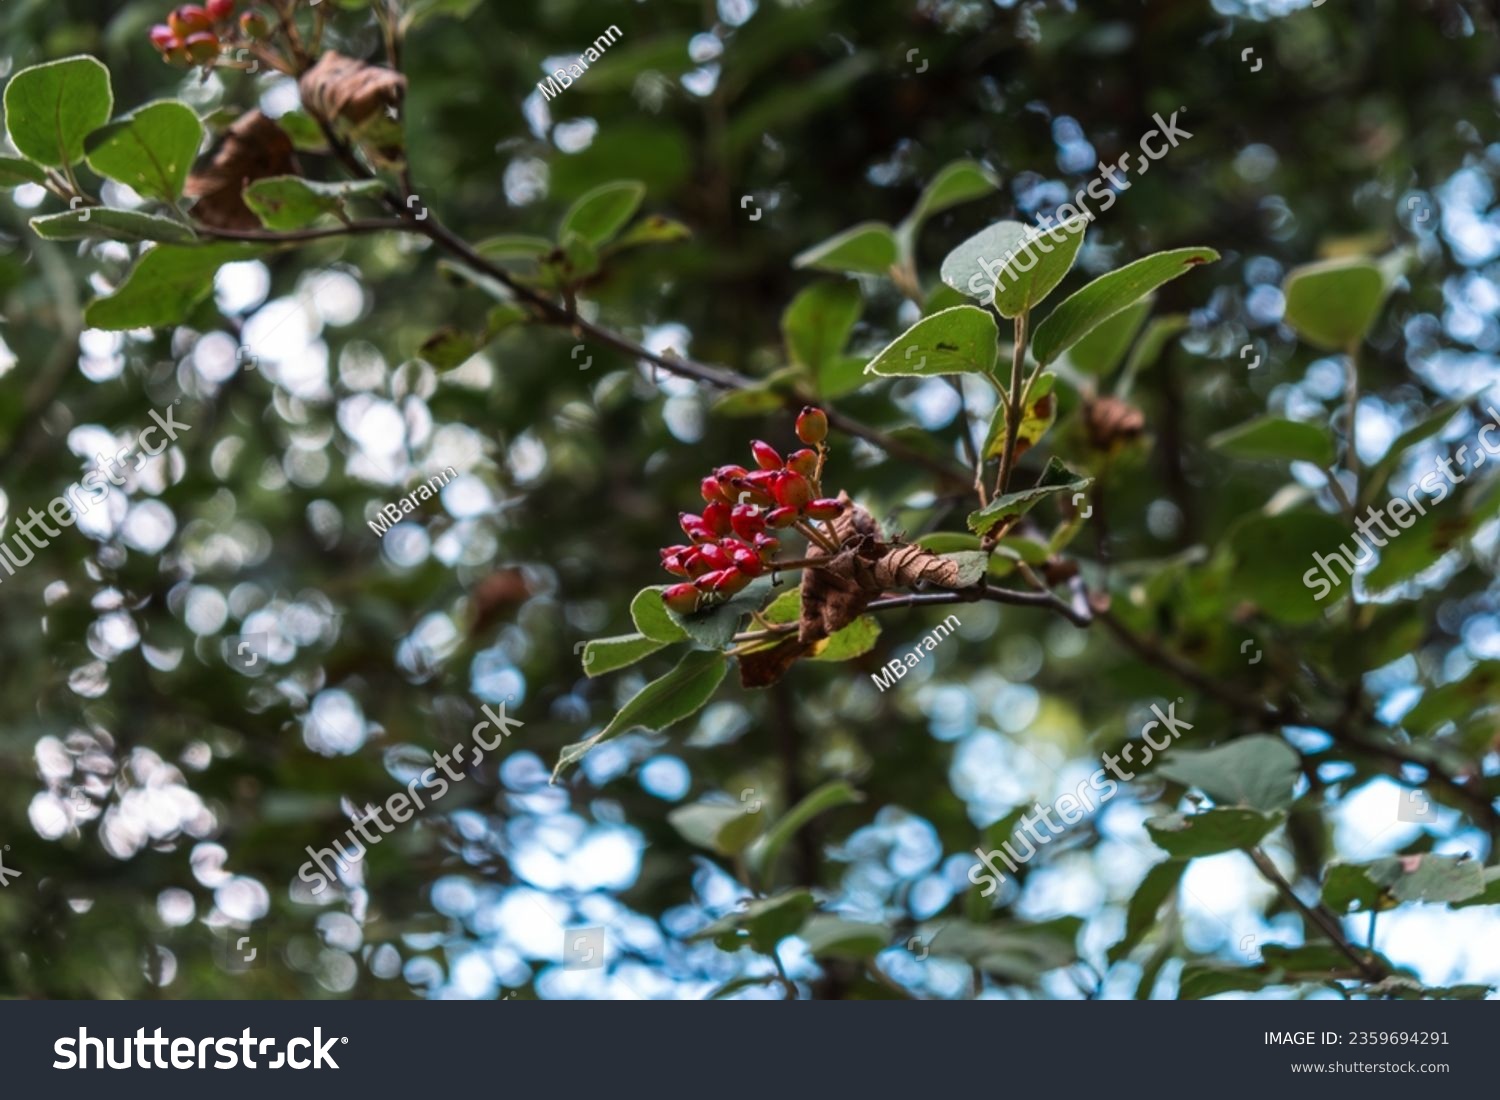 It resembles a type of viburnum that has entered the fruiting period. It could be the wayfaring tree aka mealytree. (Viburnum Lantana?) #2359694291